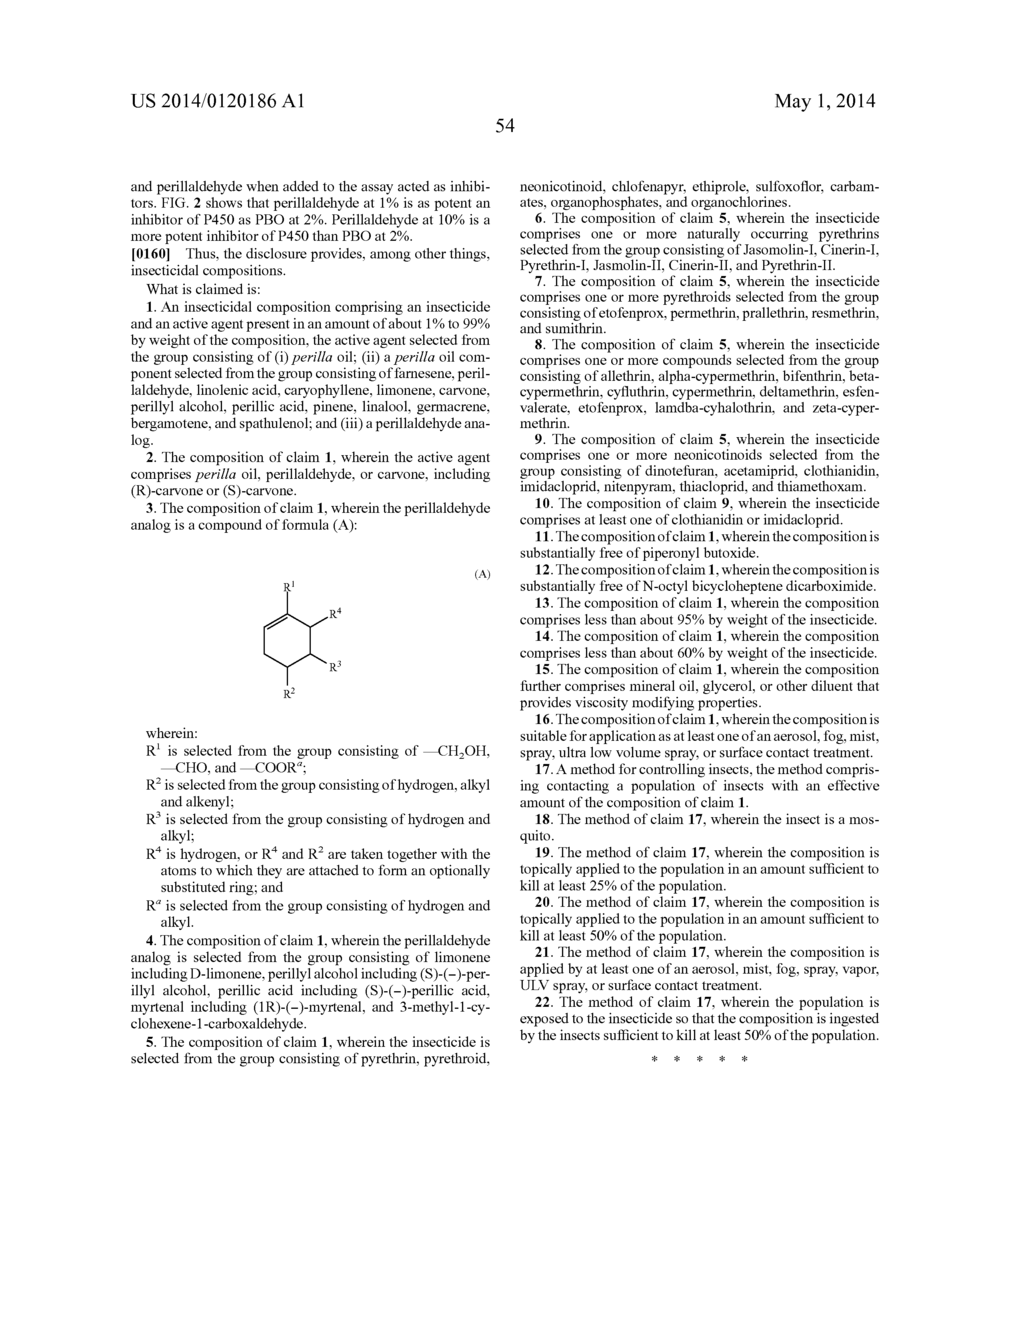 INSECTICIDAL COMPOSITIONS AND METHODS OF USING THE SAME - diagram, schematic, and image 57